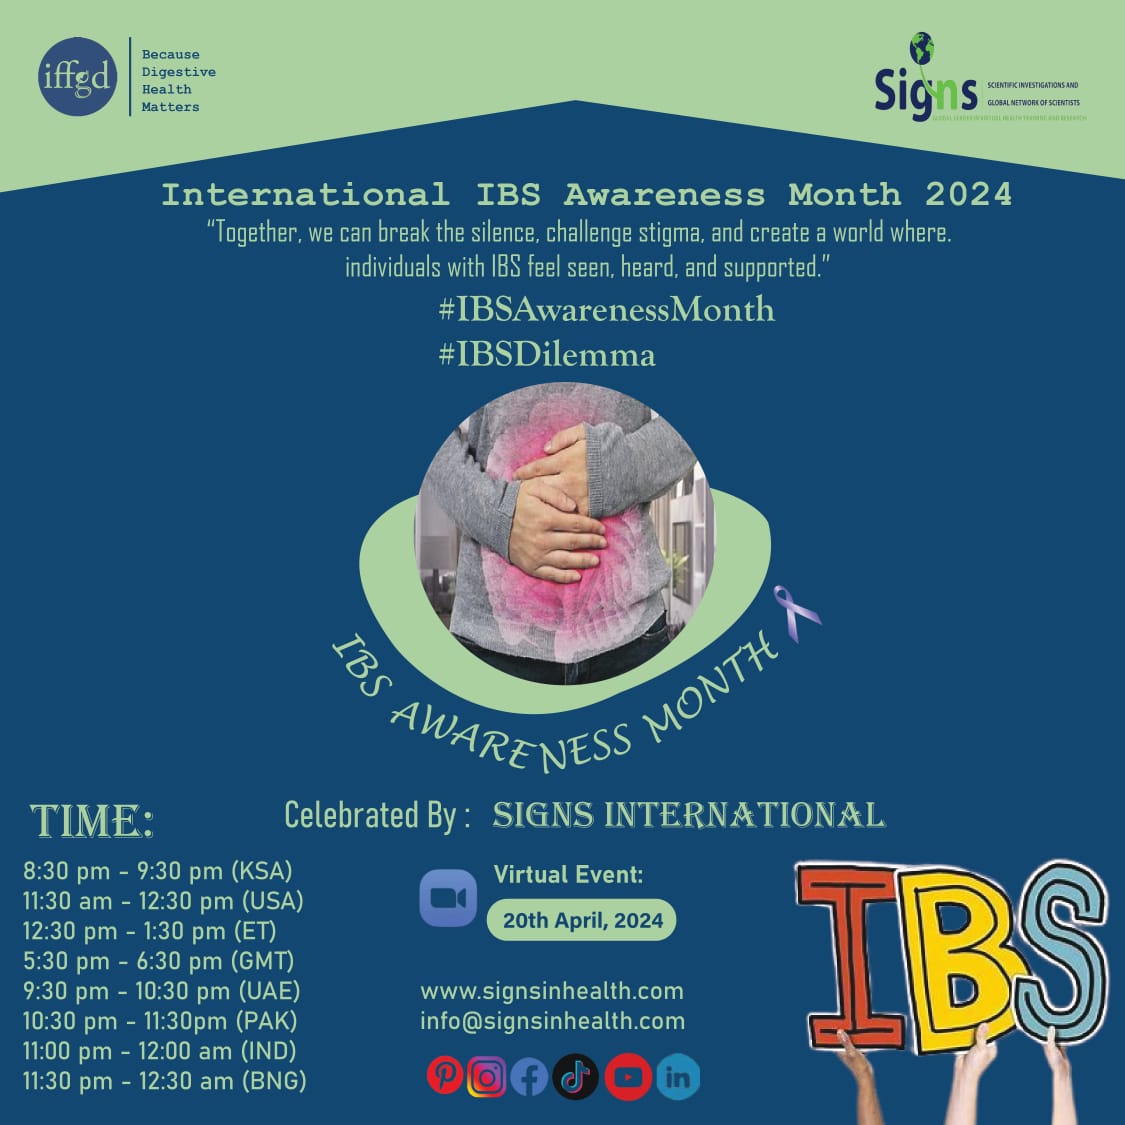 SIGNS International is arranging a FREE event on IBS AWARENESS MONTH
This year’s theme is 
*#IBSDilemma and challenges*

No Registration fee
Registration link

us02web.zoom.us/meeting/regist…

After registering, you will receive an email about joining the meeting.